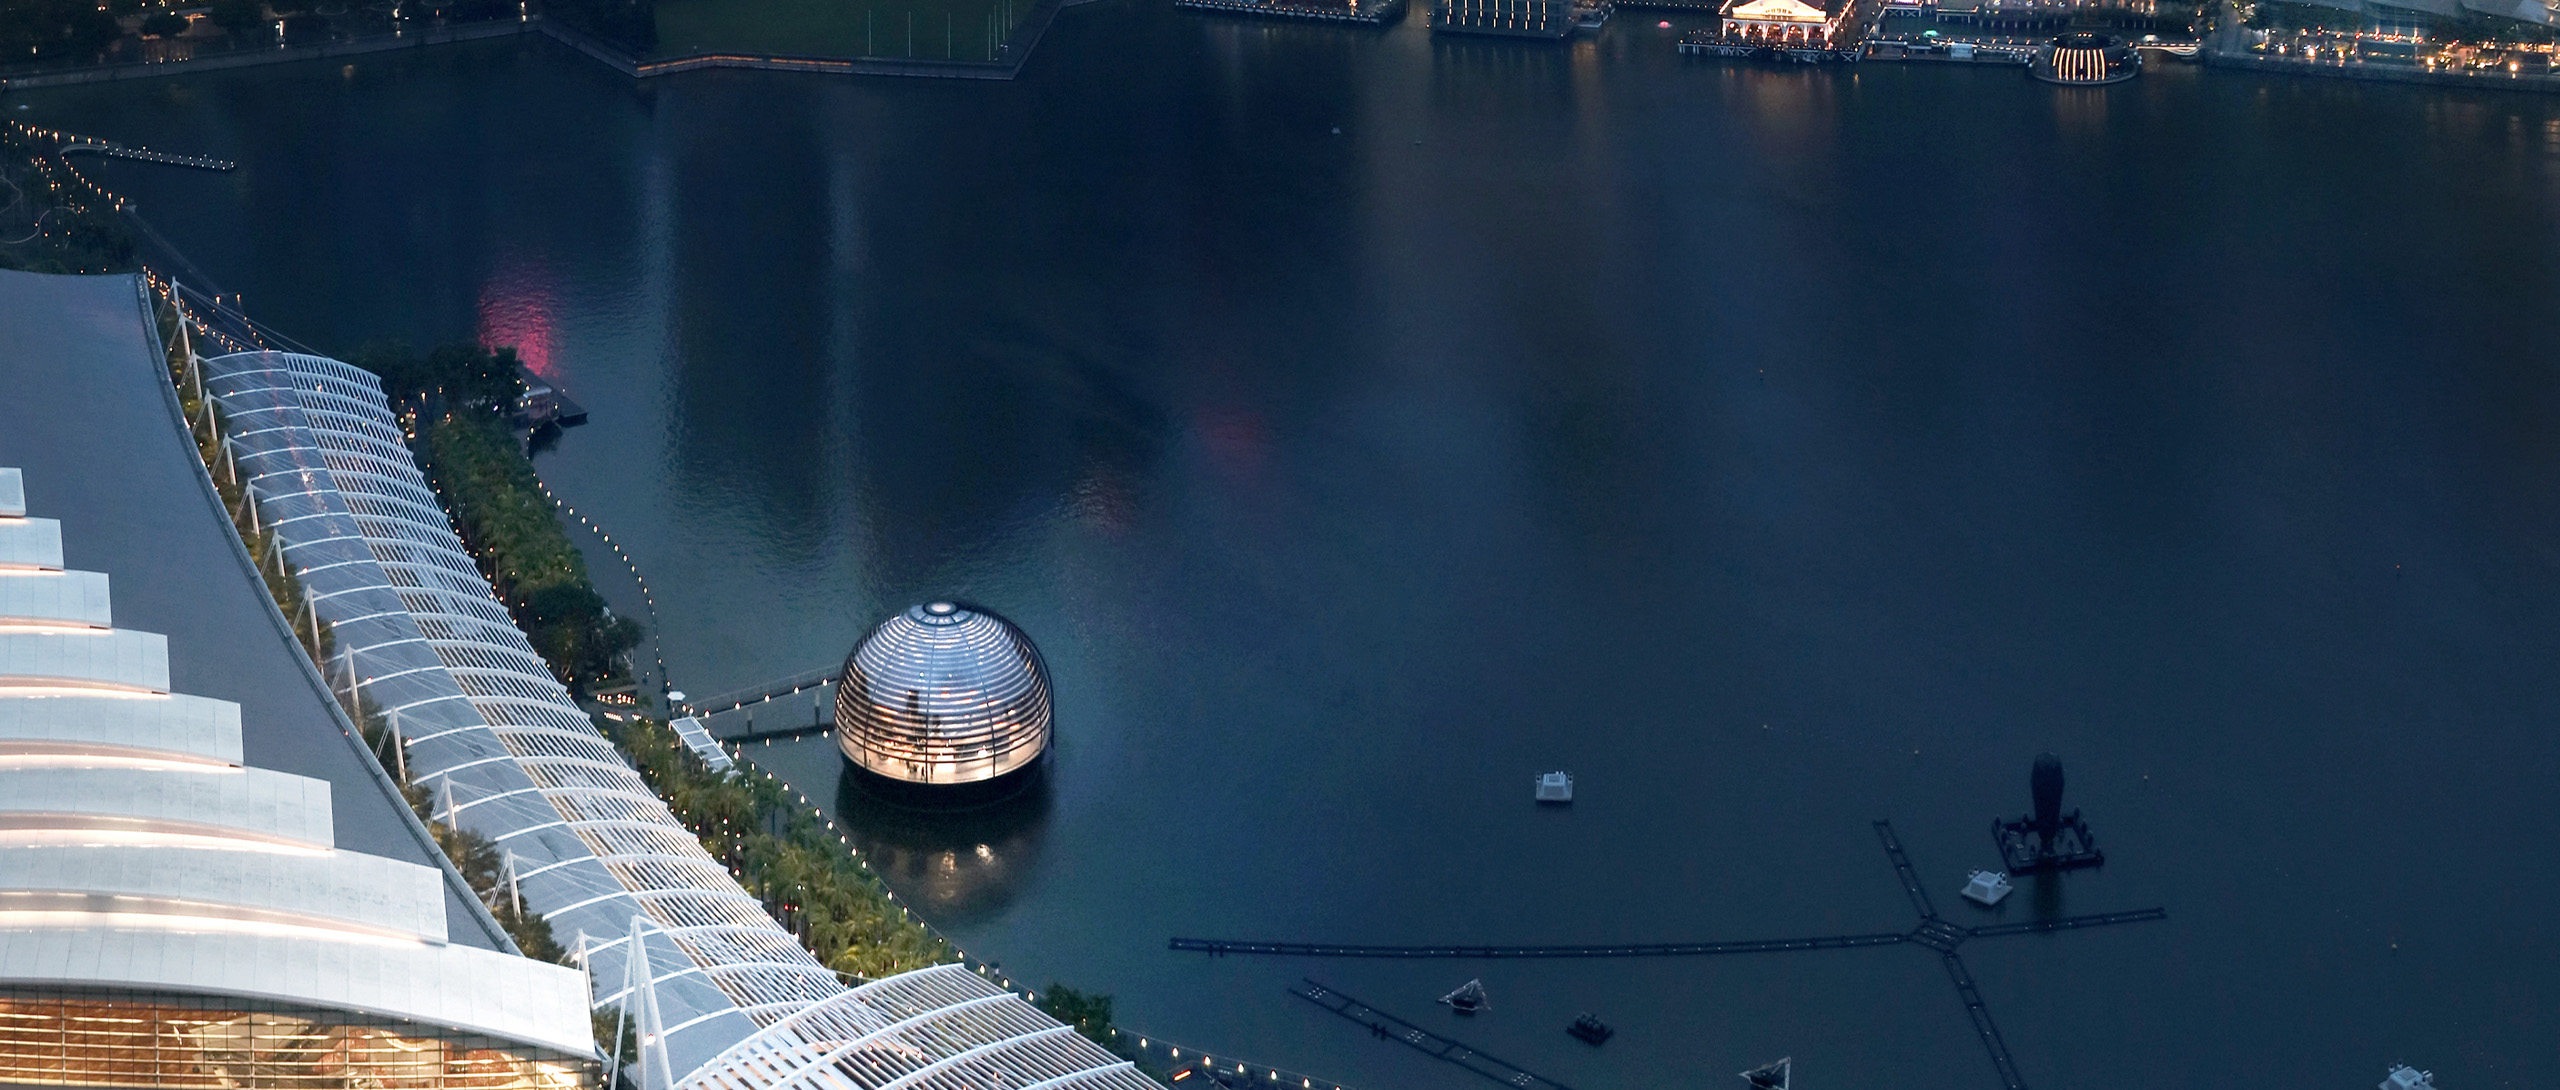 Floating Apple Store With Sphere-Shaped Design to Open in Singapore